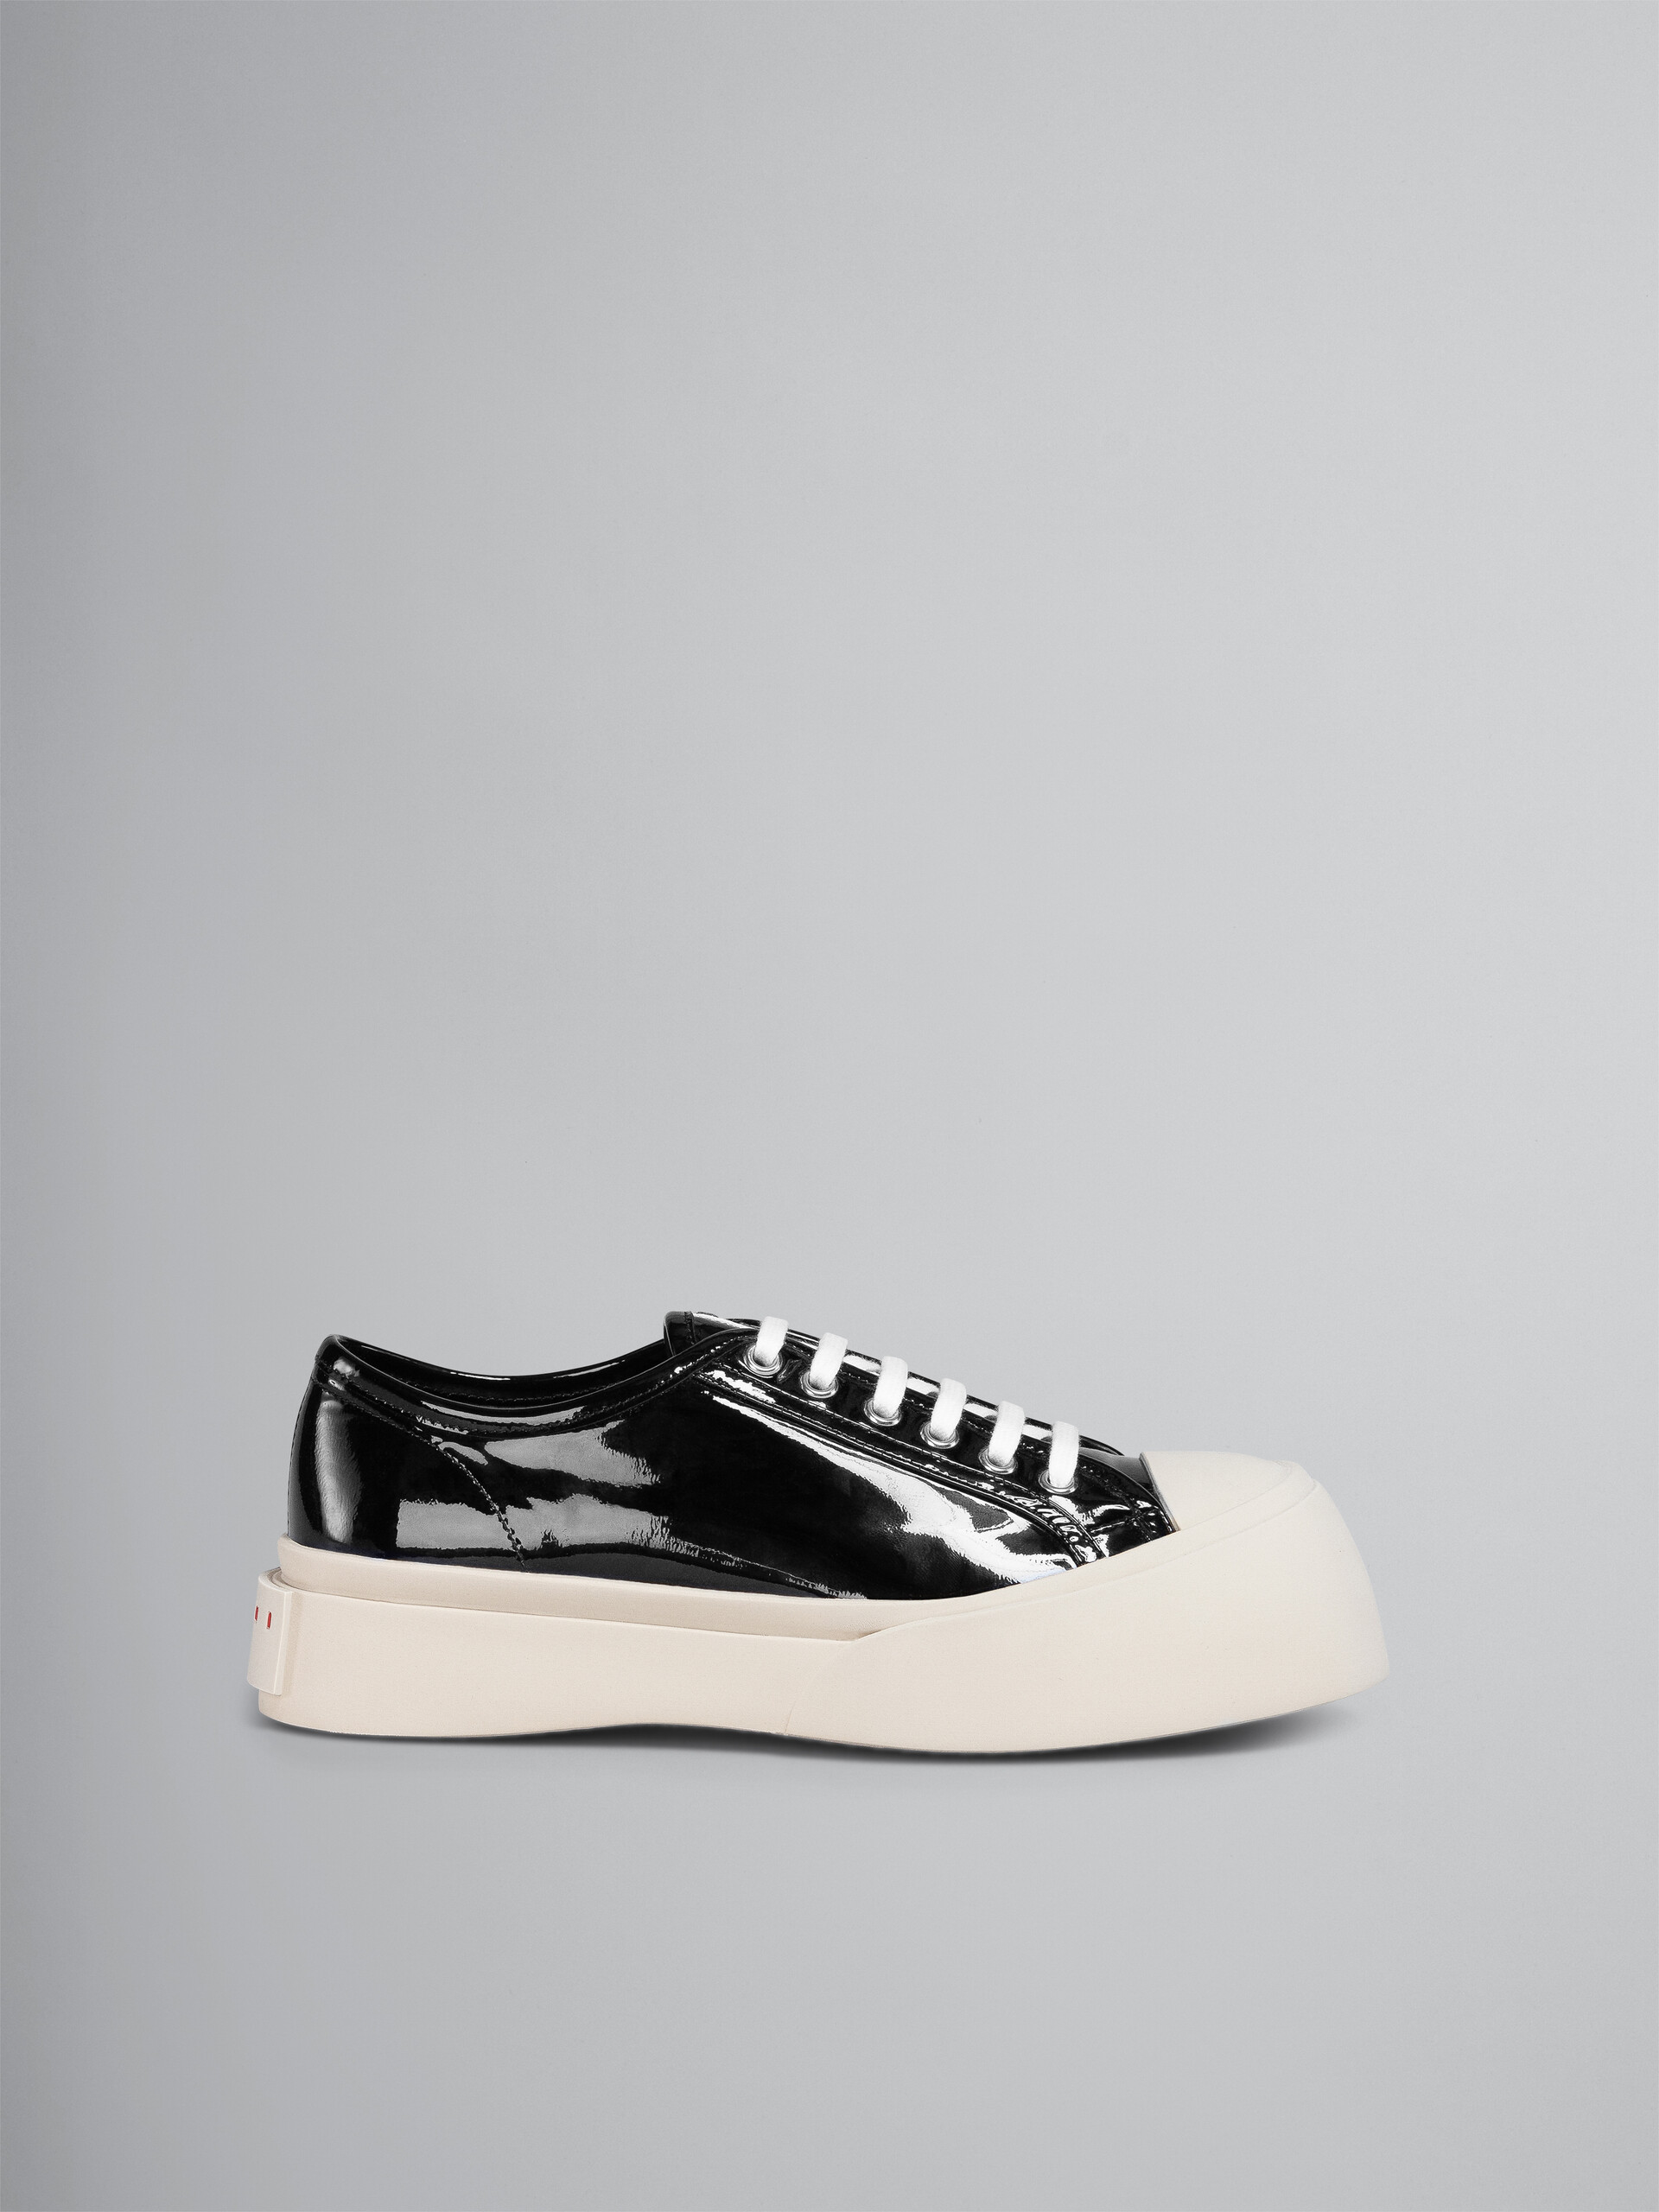 Patent leather PABLO lace-up sneaker - Sneakers - Image 1